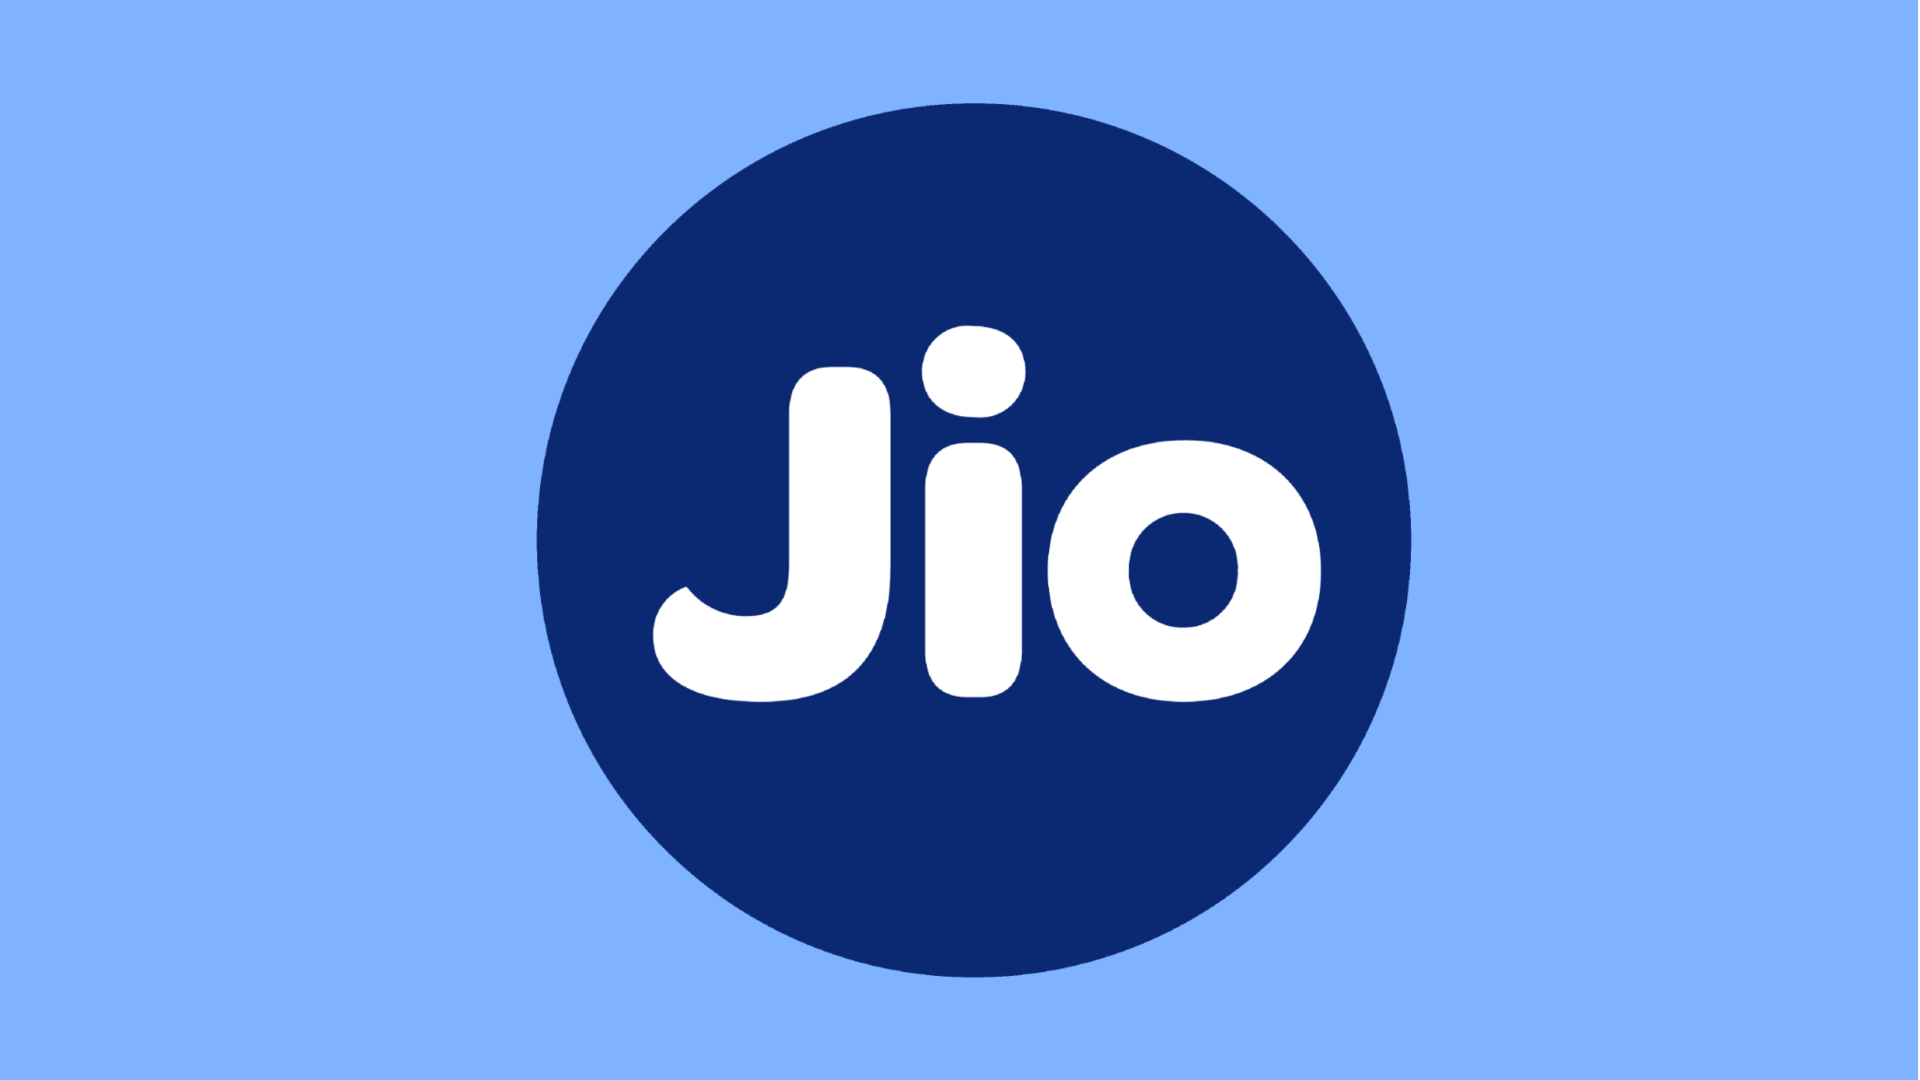 Dobby Ads - The Jio logo depicts how Oil propelled Reliance's growth in the  past and how data will drive Reliance's growth in the future. . . .  #dobbyads #marketing #advertising #adtech #